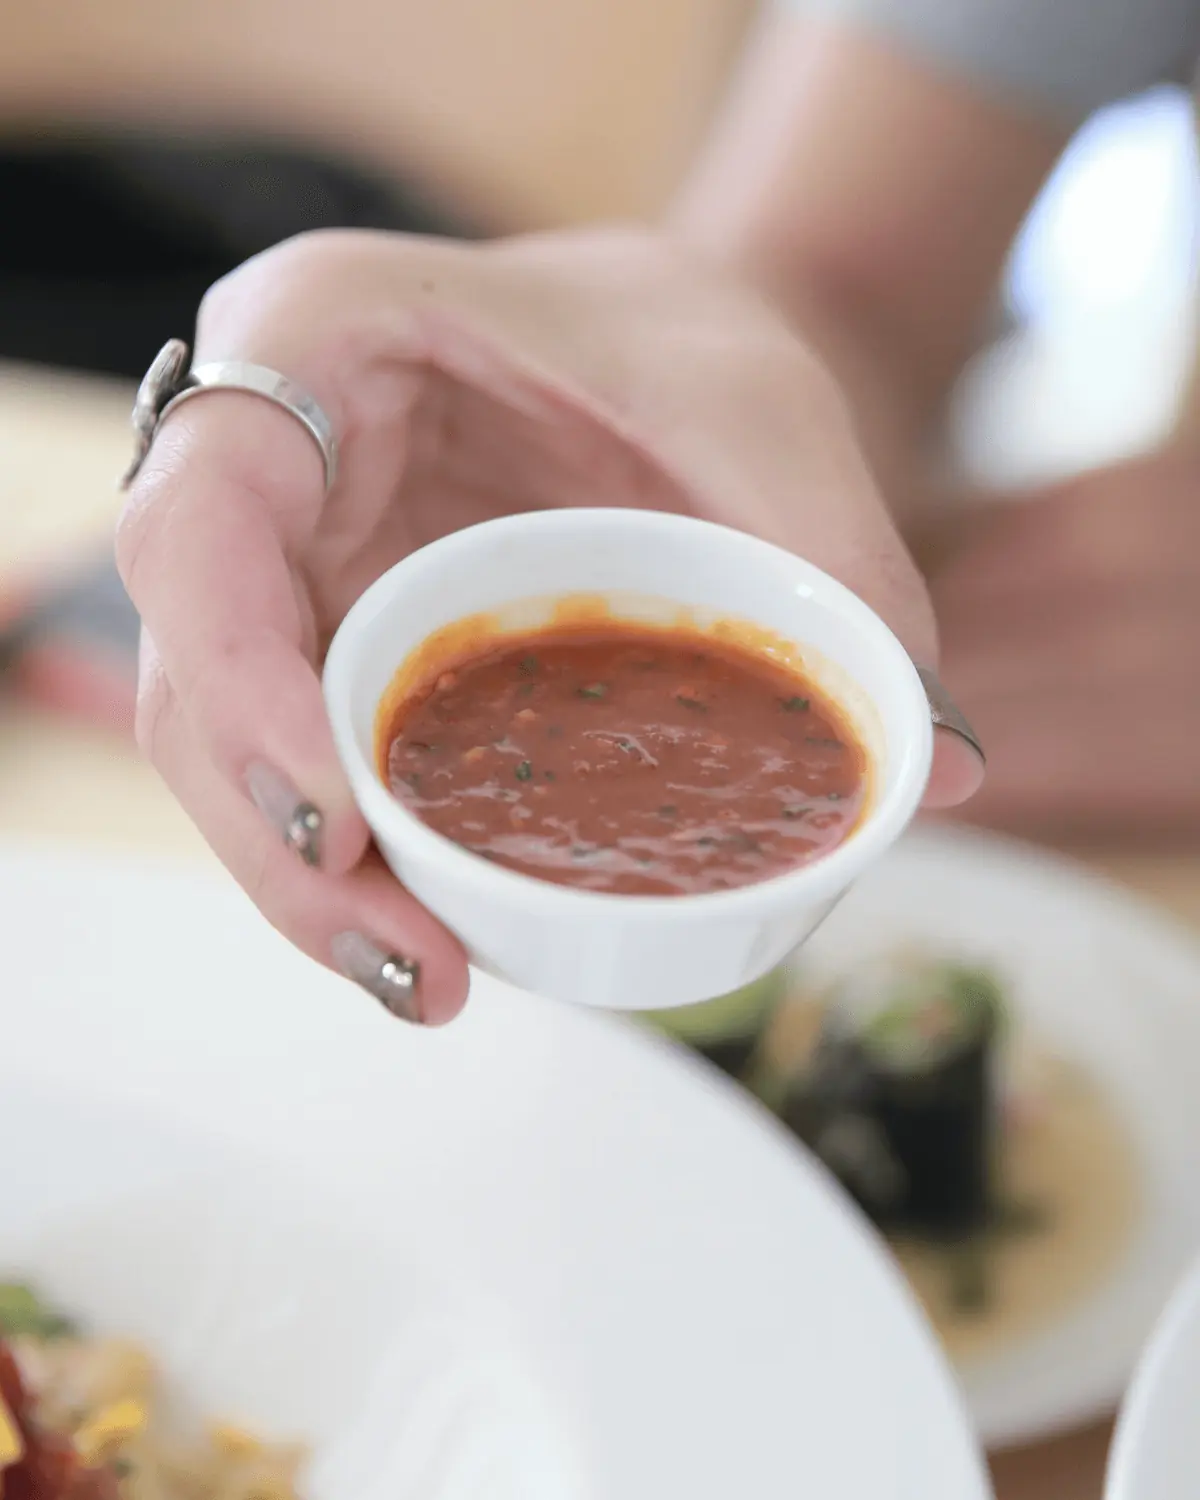 A hand holding a small bowl filled with Gochujang.